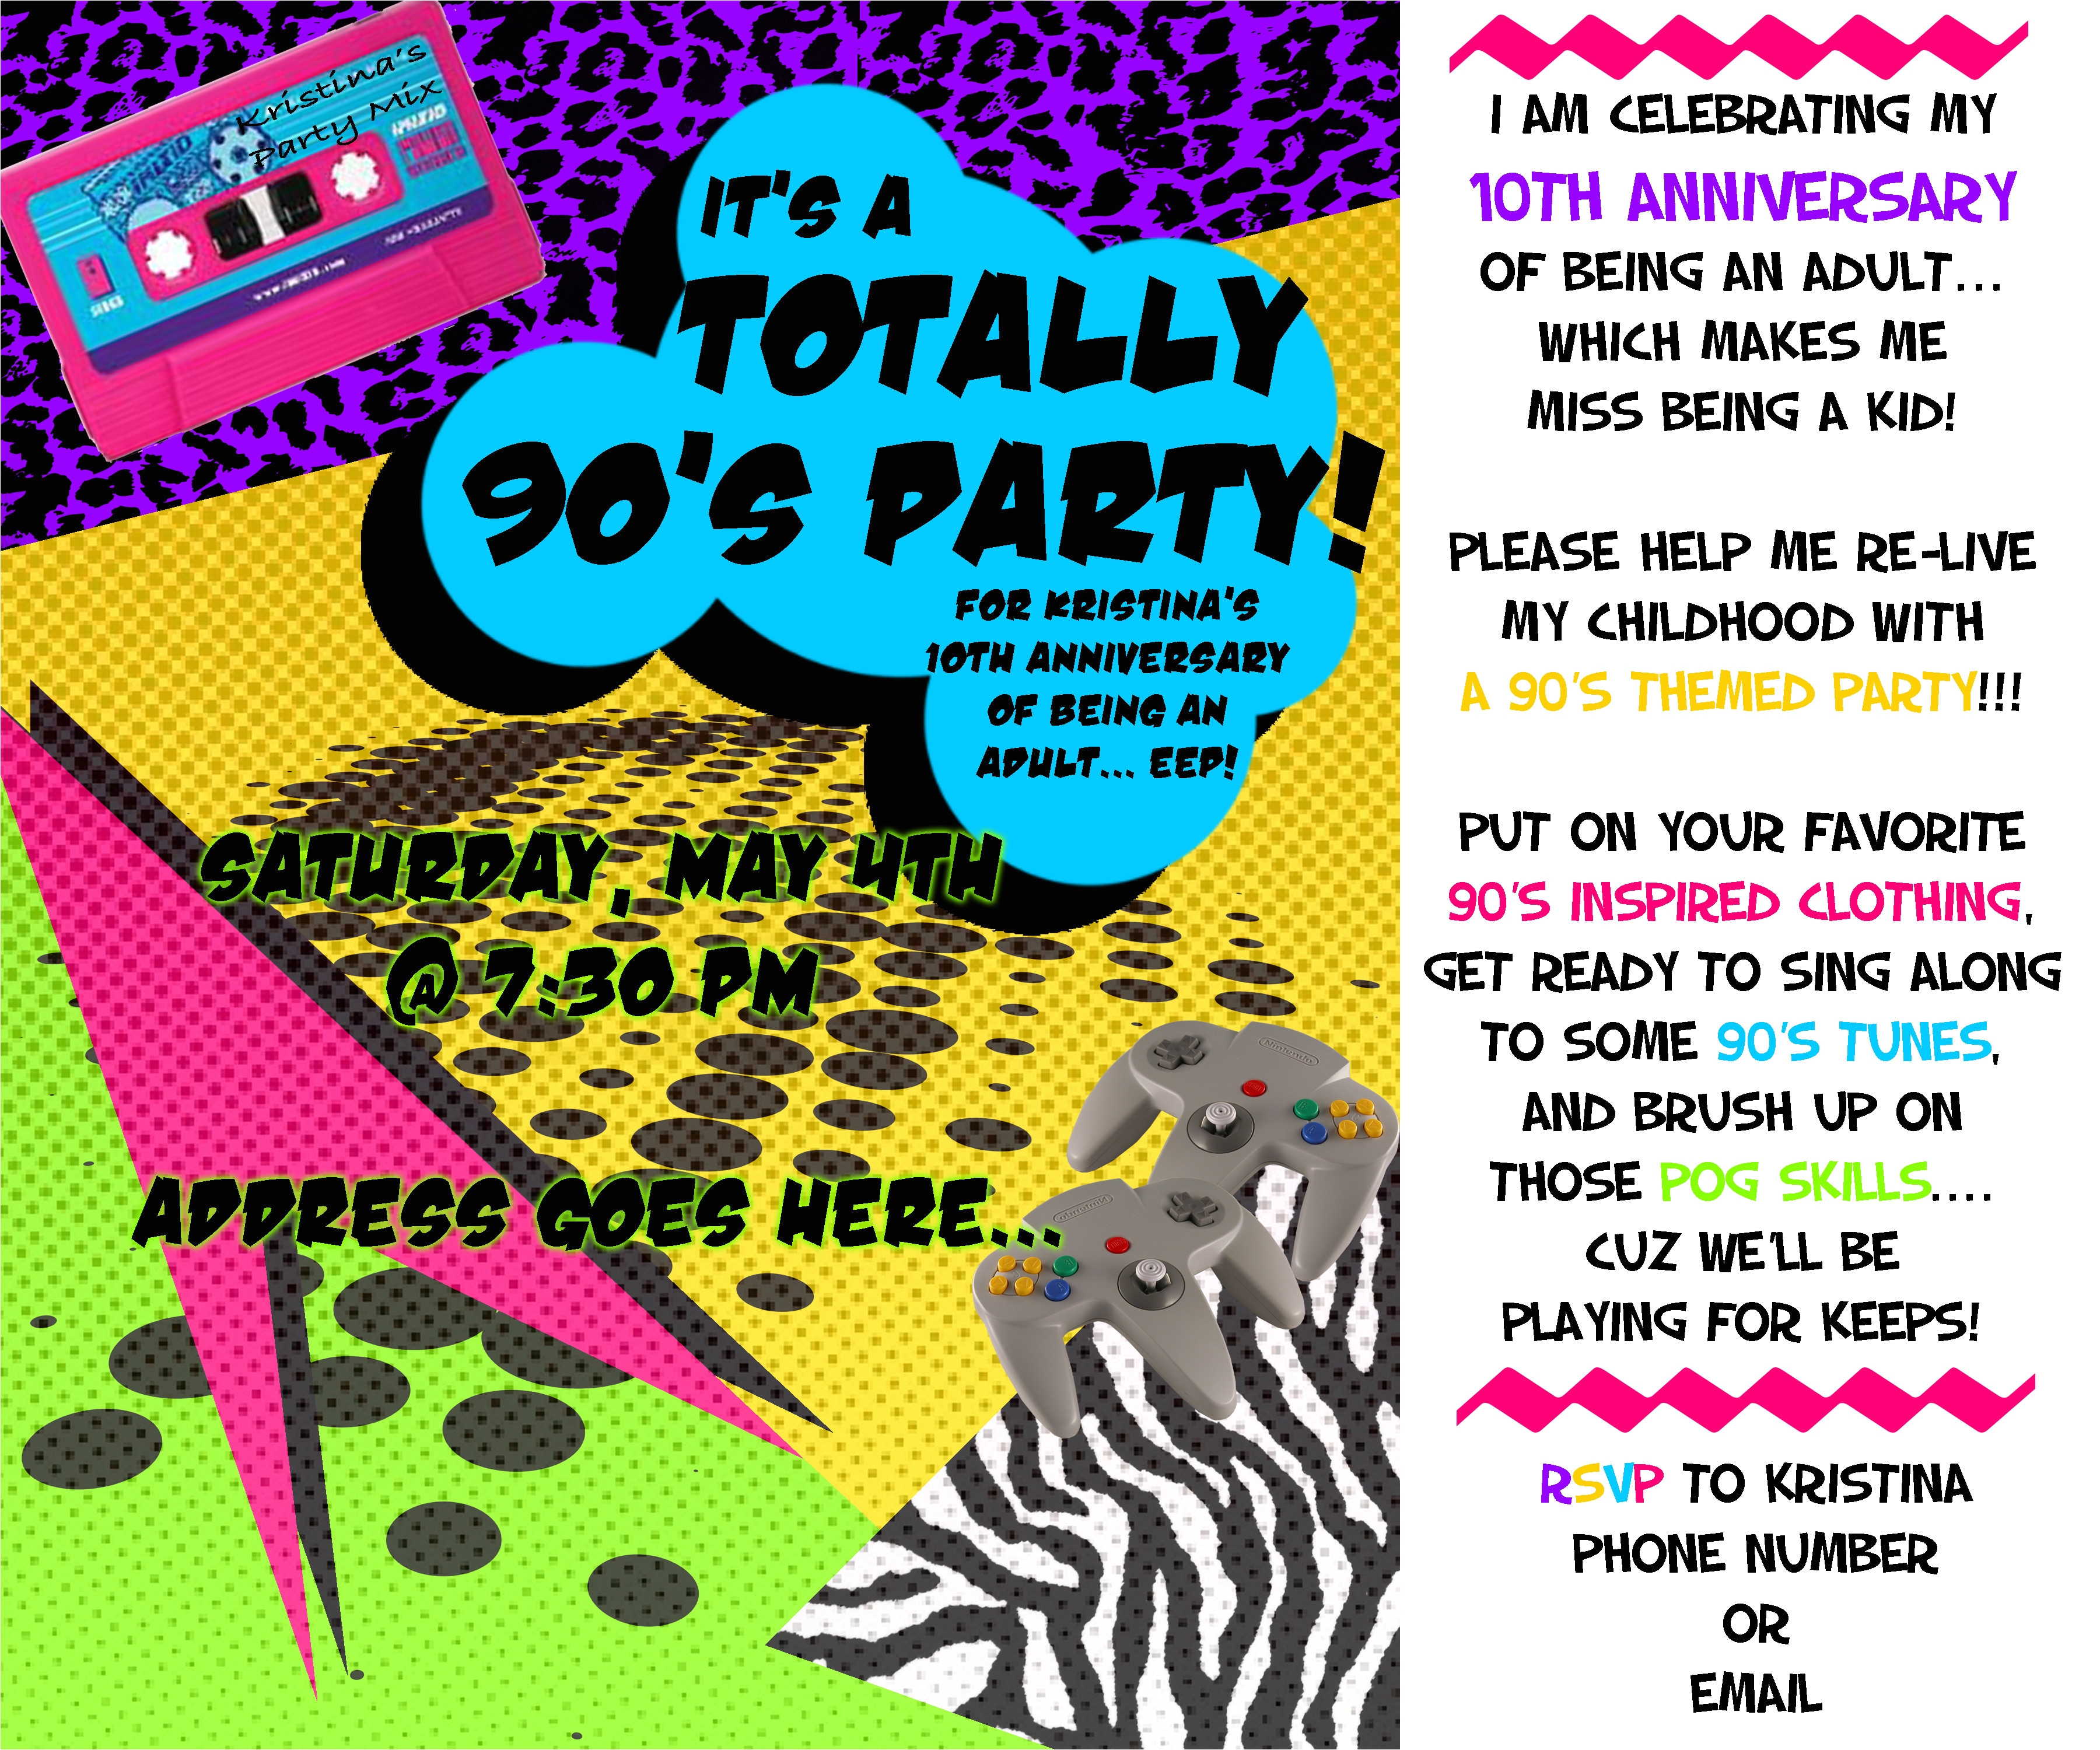 90s theme party decorations beautiful 90s party invitation wording oxyline 09e7fc4fbe37